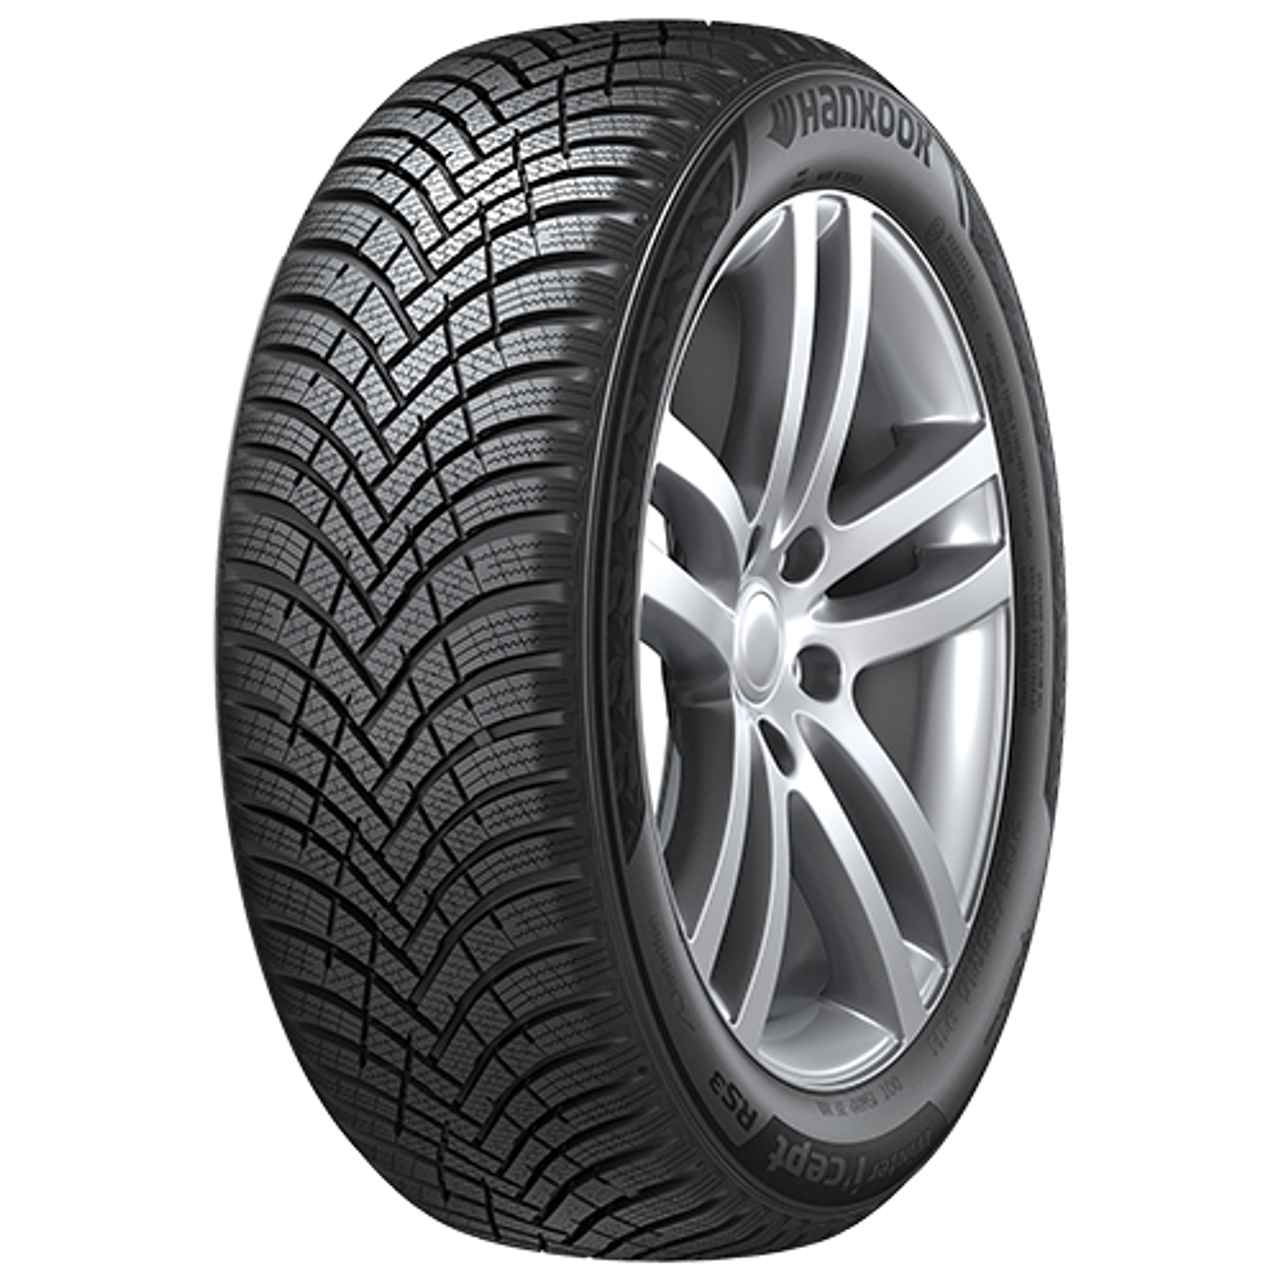 HANKOOK WINTER I*CEPT RS3 195/55R16 87H BSW